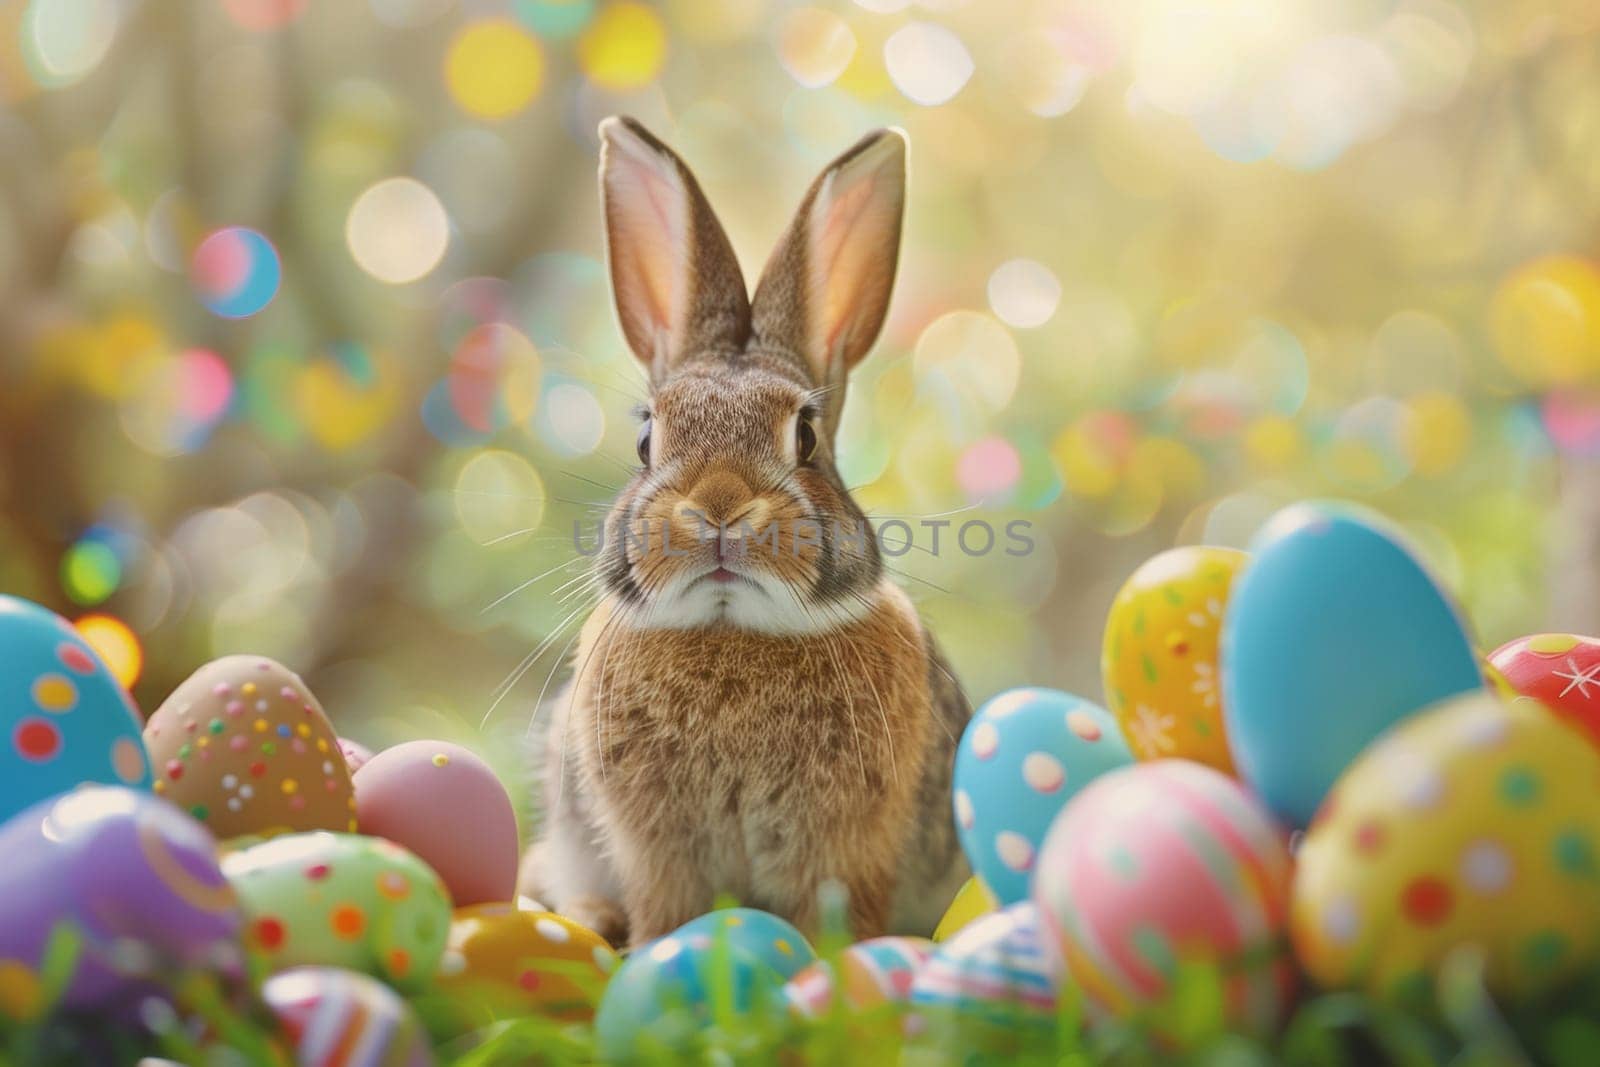 A rabbit is standing in a field of Easter eggs by nateemee